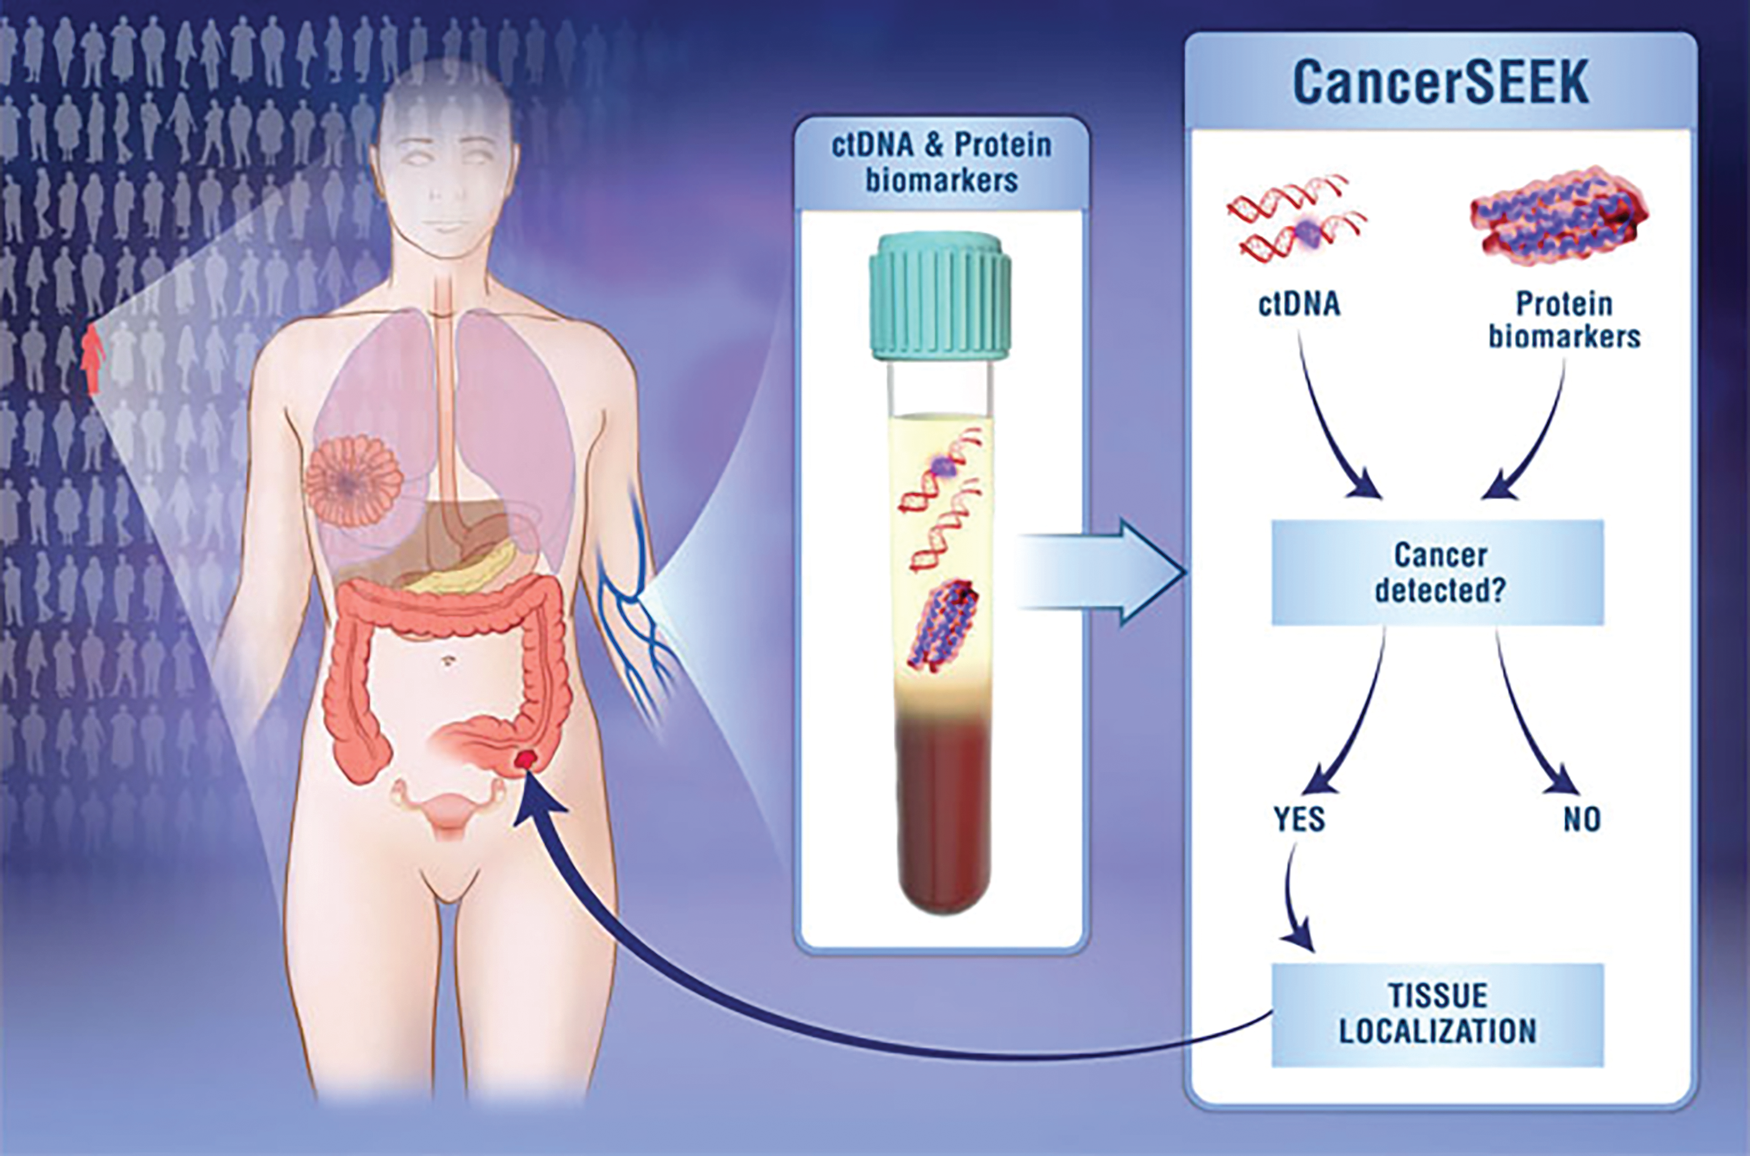 Figure 2. Designed to complement existing standard-of-care cancer screening methods, CancerSEEK detects genetic mutations (circulating tumor DNA or ctDNA) and protein biomarkers that are associated with the presence of multiple cancer types, and does it through a simple blood draw. (The tissue localization arrow in this graphic refers to a JHU retrospective study of 1,005 patients with one of eight cancer types, and demonstrated that a molecular test was able to localize the cancers to a small number of anatomic sites in 83% of patients. Details at https://hub.jhu.edu/2018/01/19/cancer-blood-test-johns-hopkins/.) (Image credit: Elizabeth Cook and Kaitlin Lindsay.)